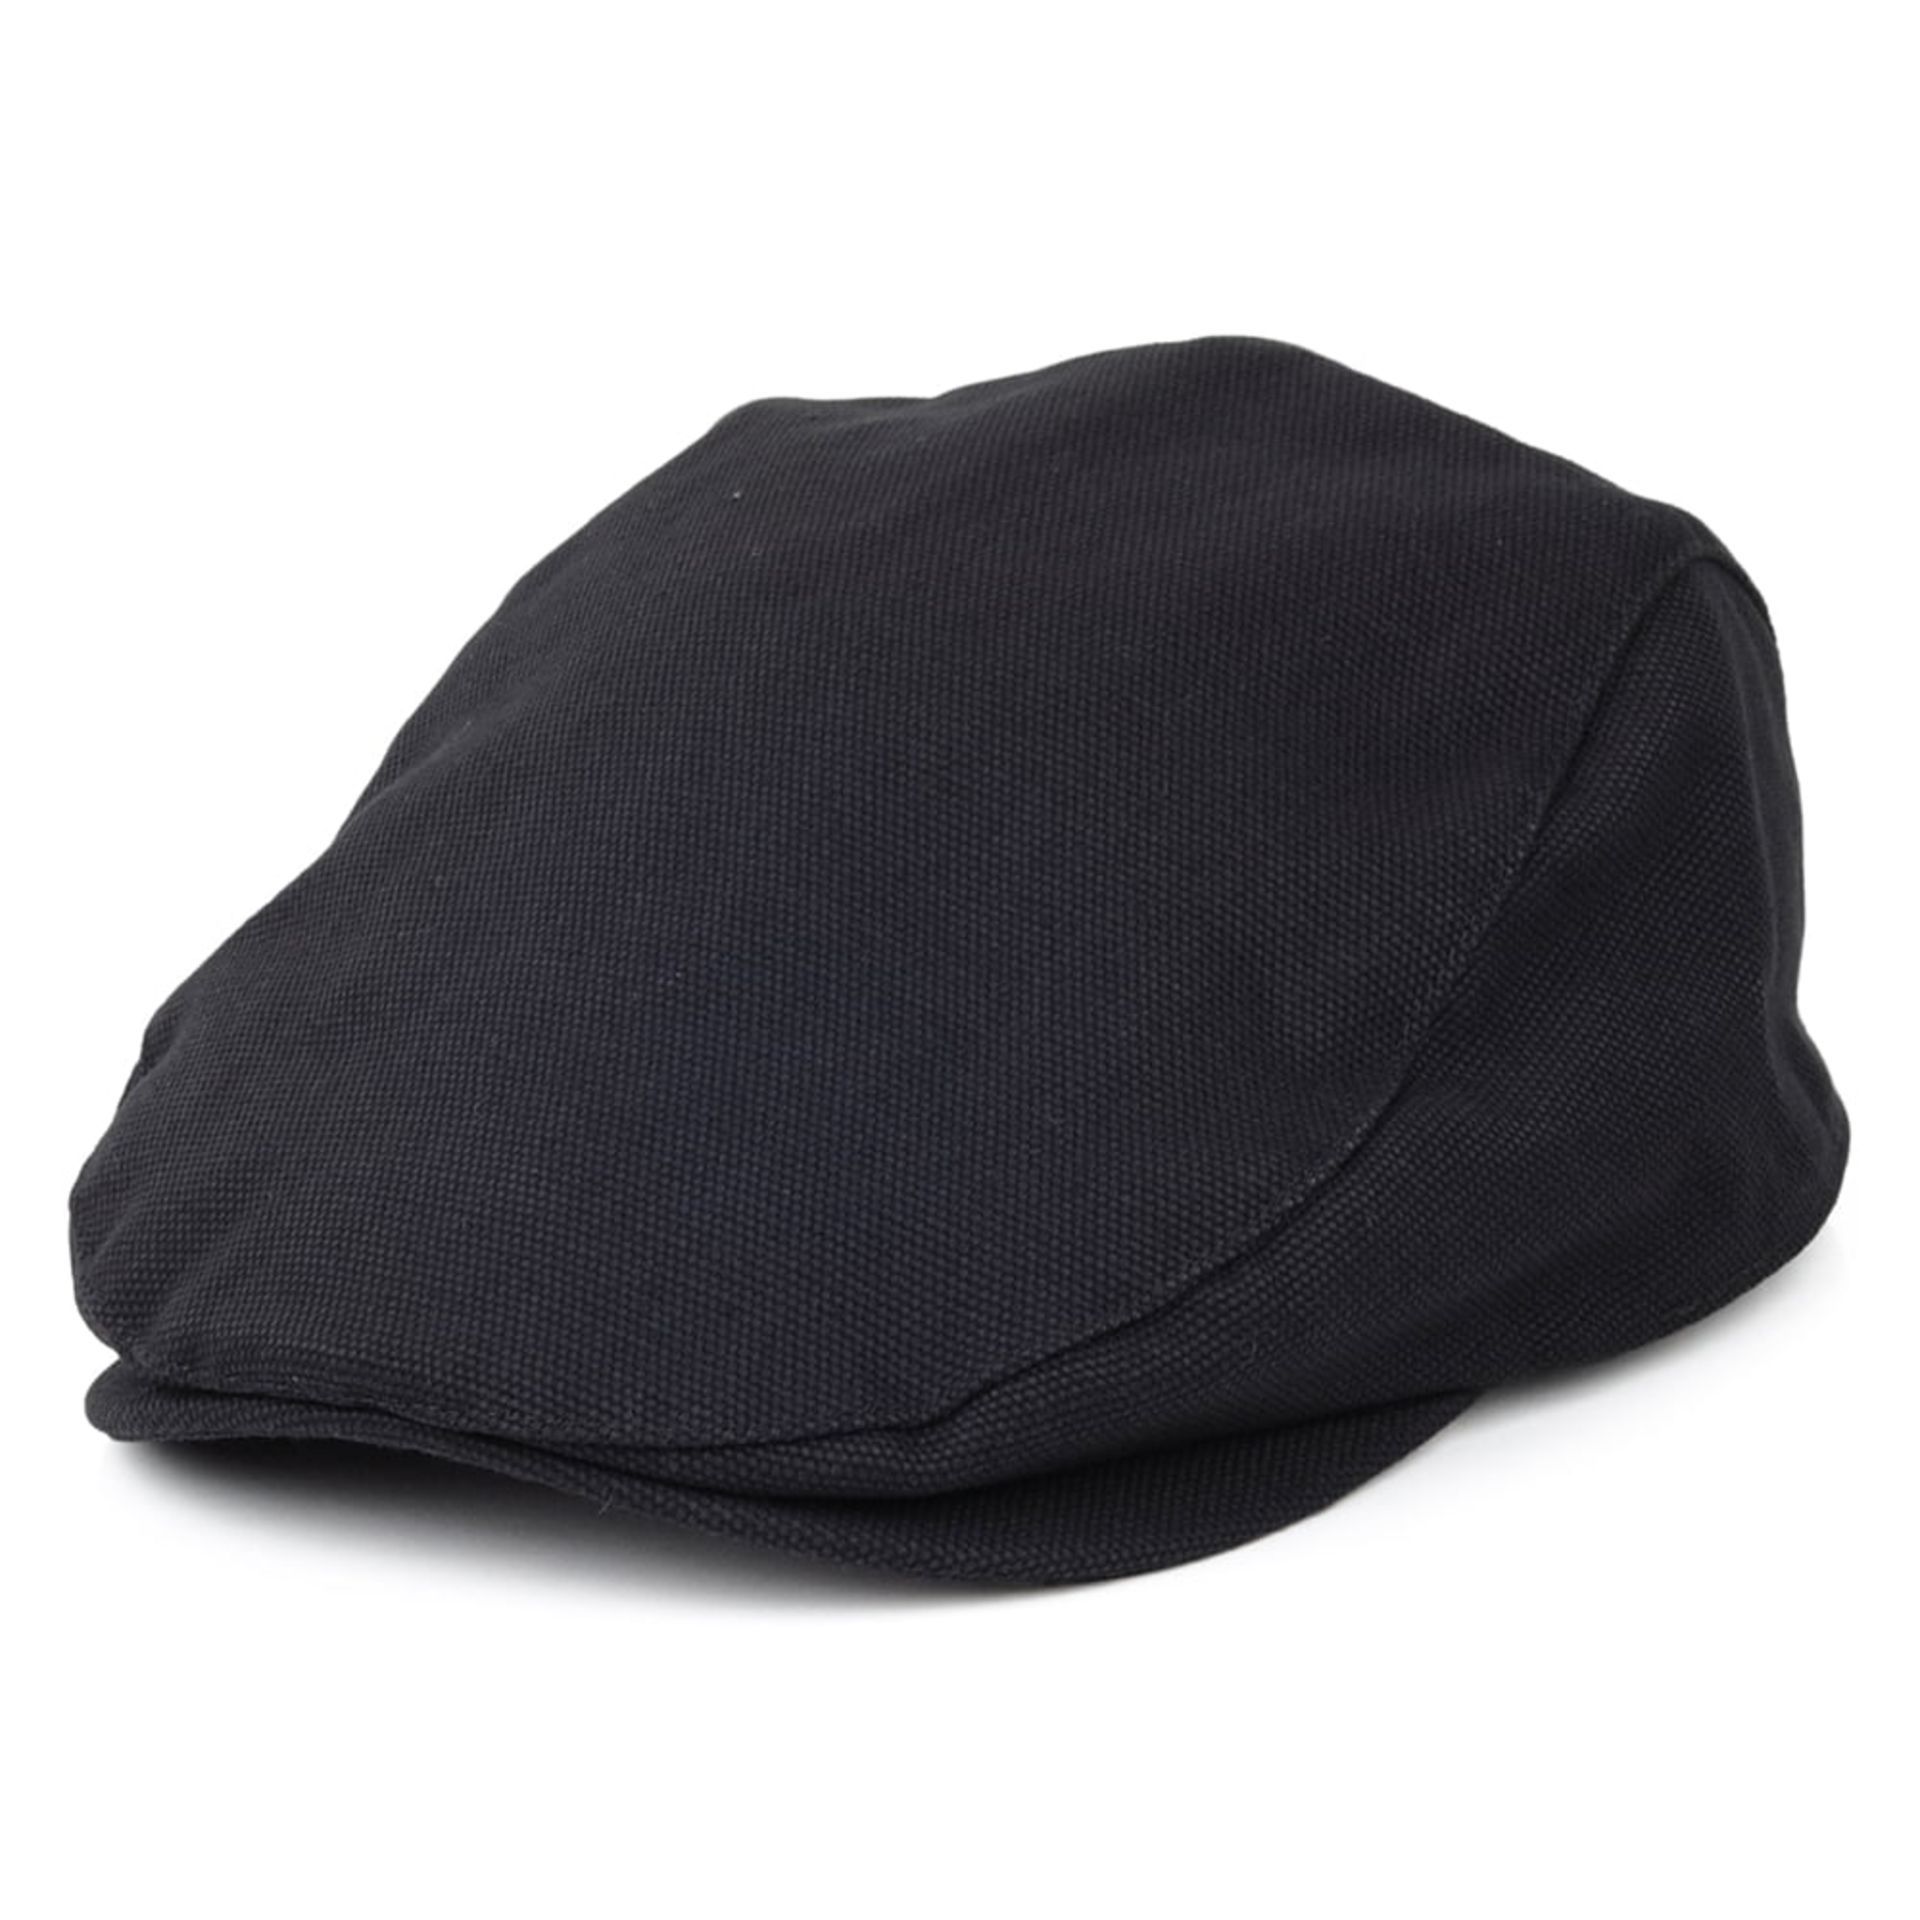 BRAND NEW BARBOUR NAVY CONTIN FLAT CAP SIZE SMALL RRP £35 -2